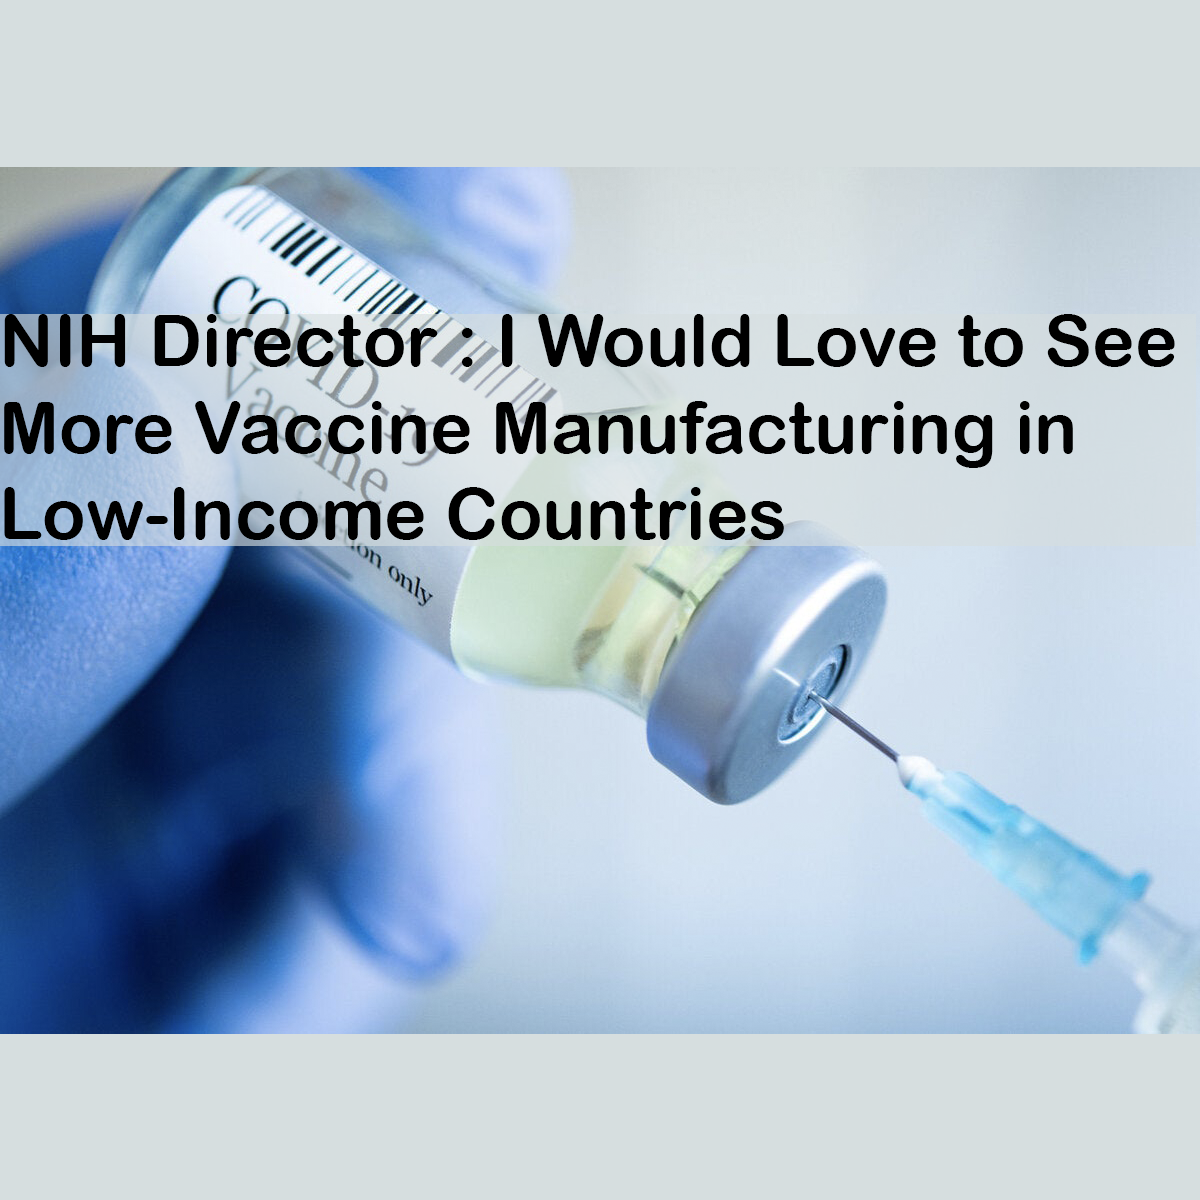 NIH Director : I Would Love to See More Vaccine Manufacturing in Low-Income Countries